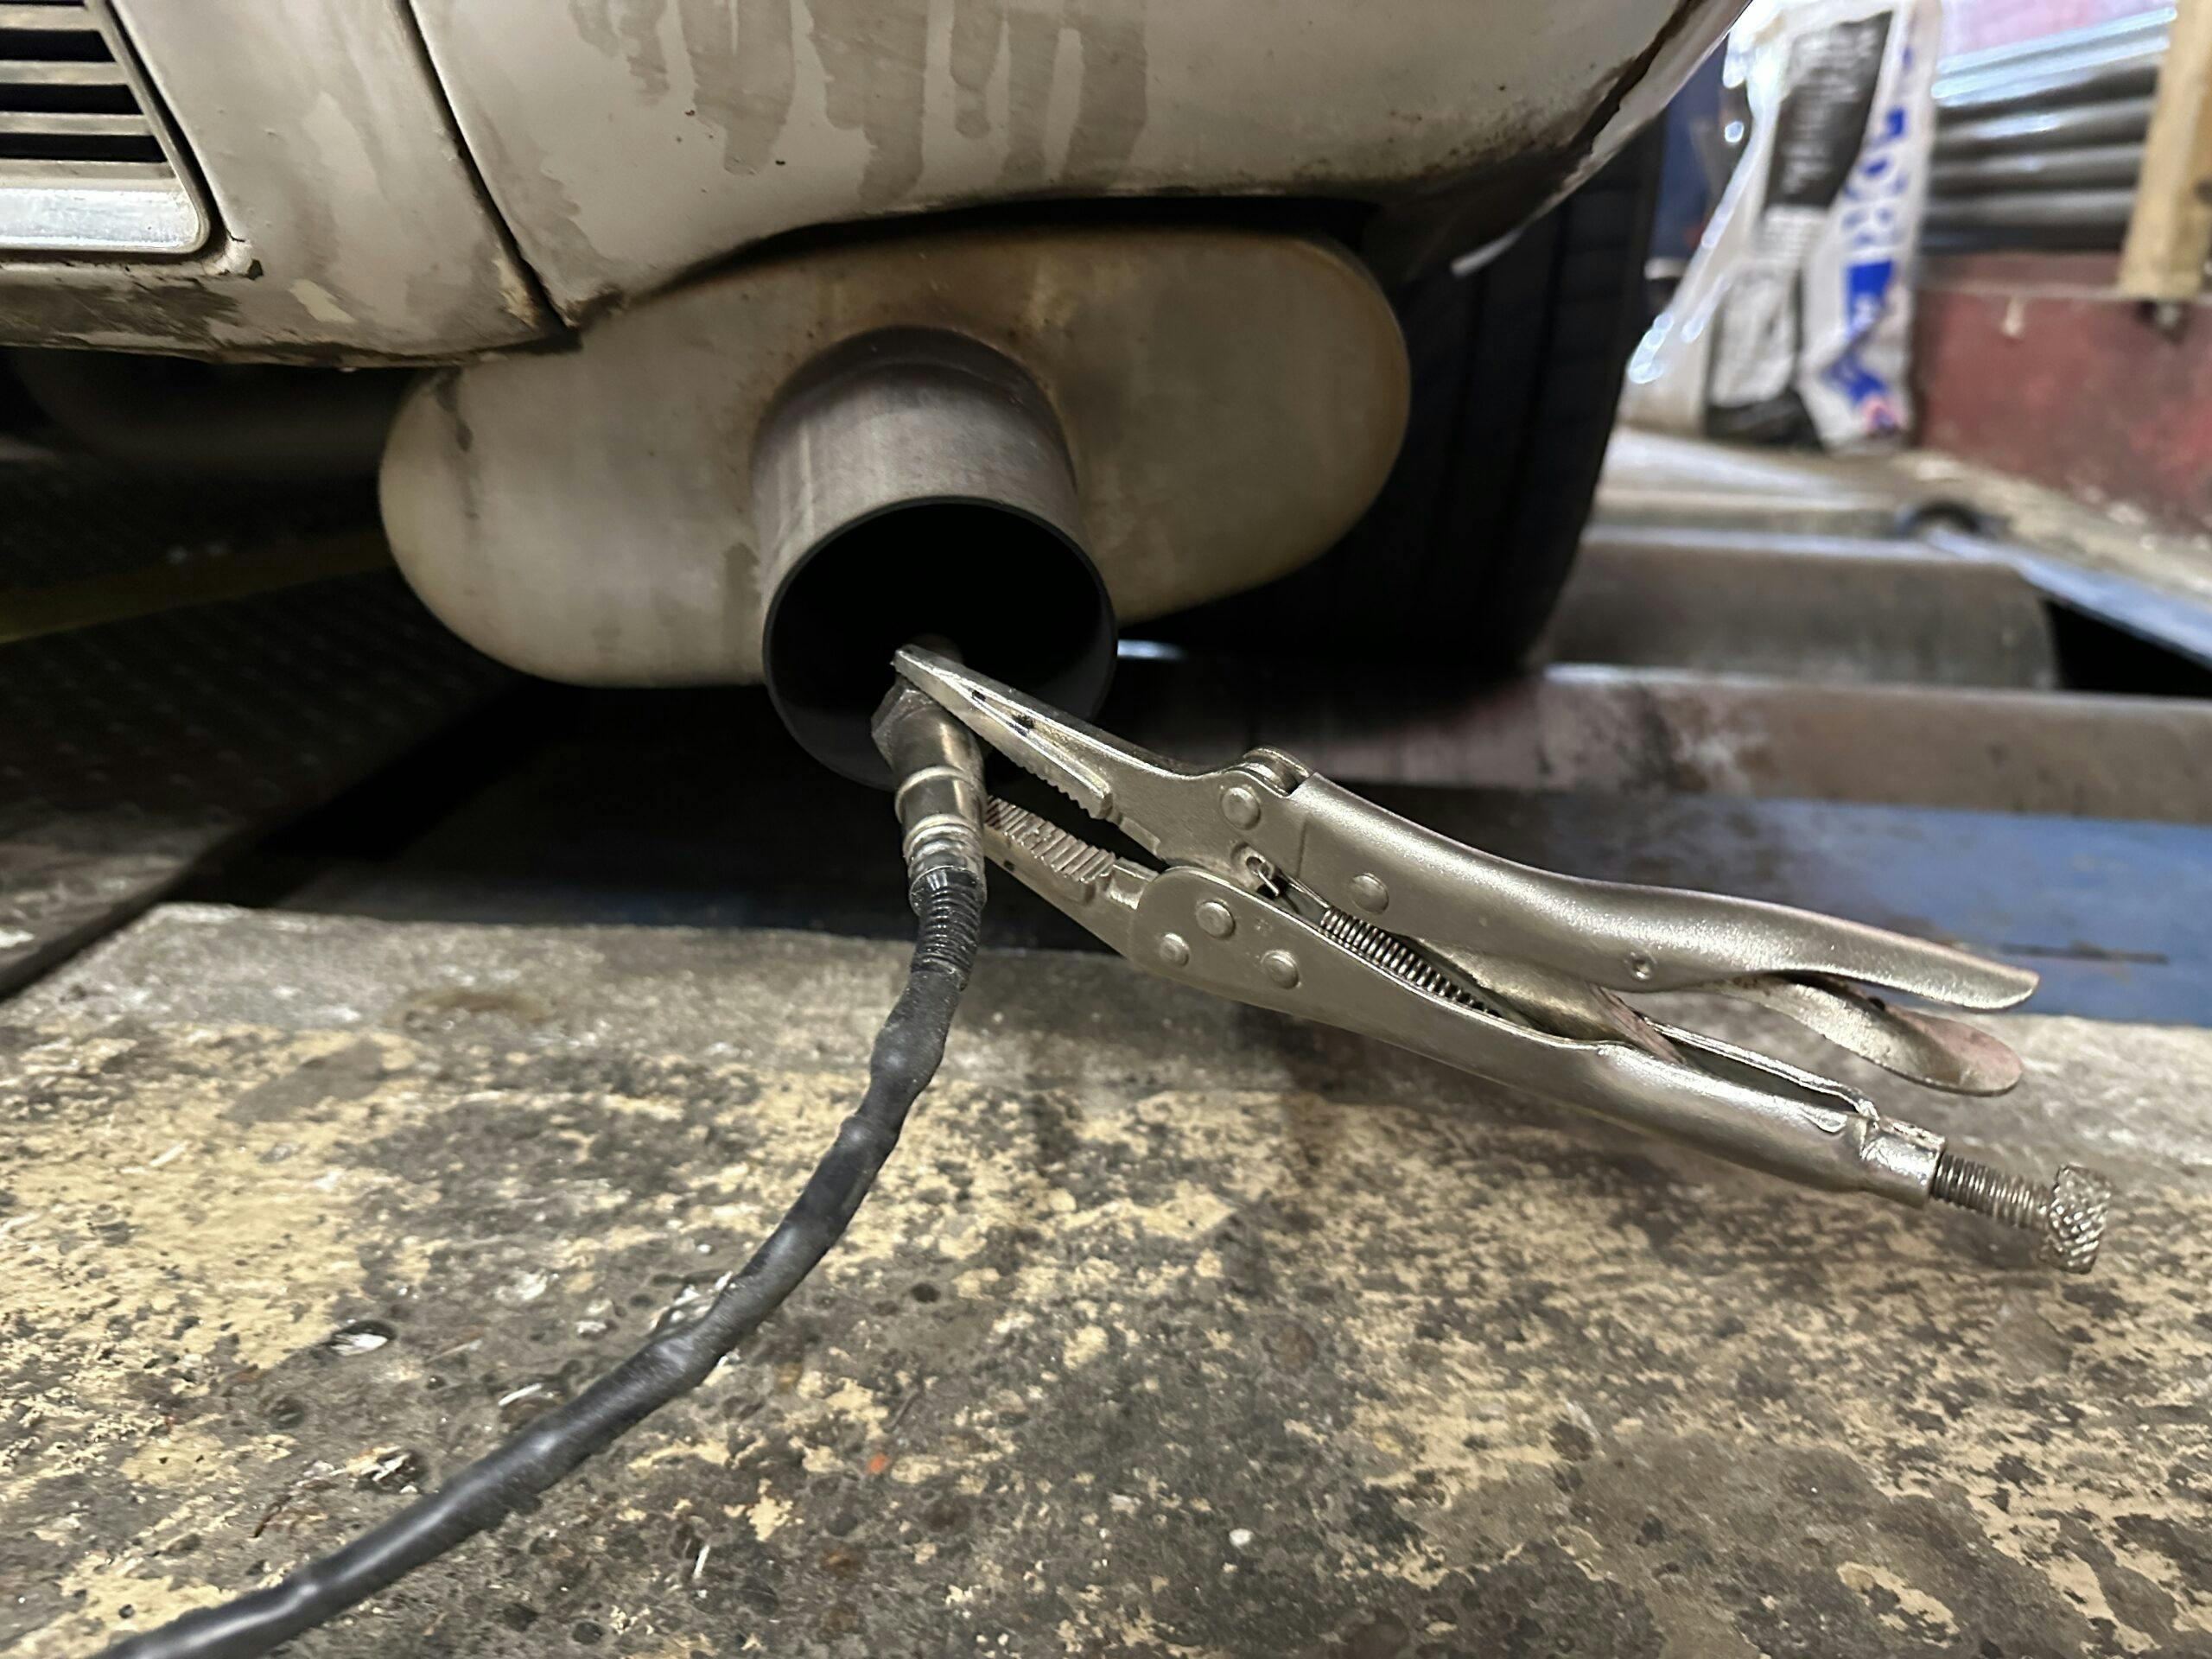 02 sensor clamped to Corvair exhaust